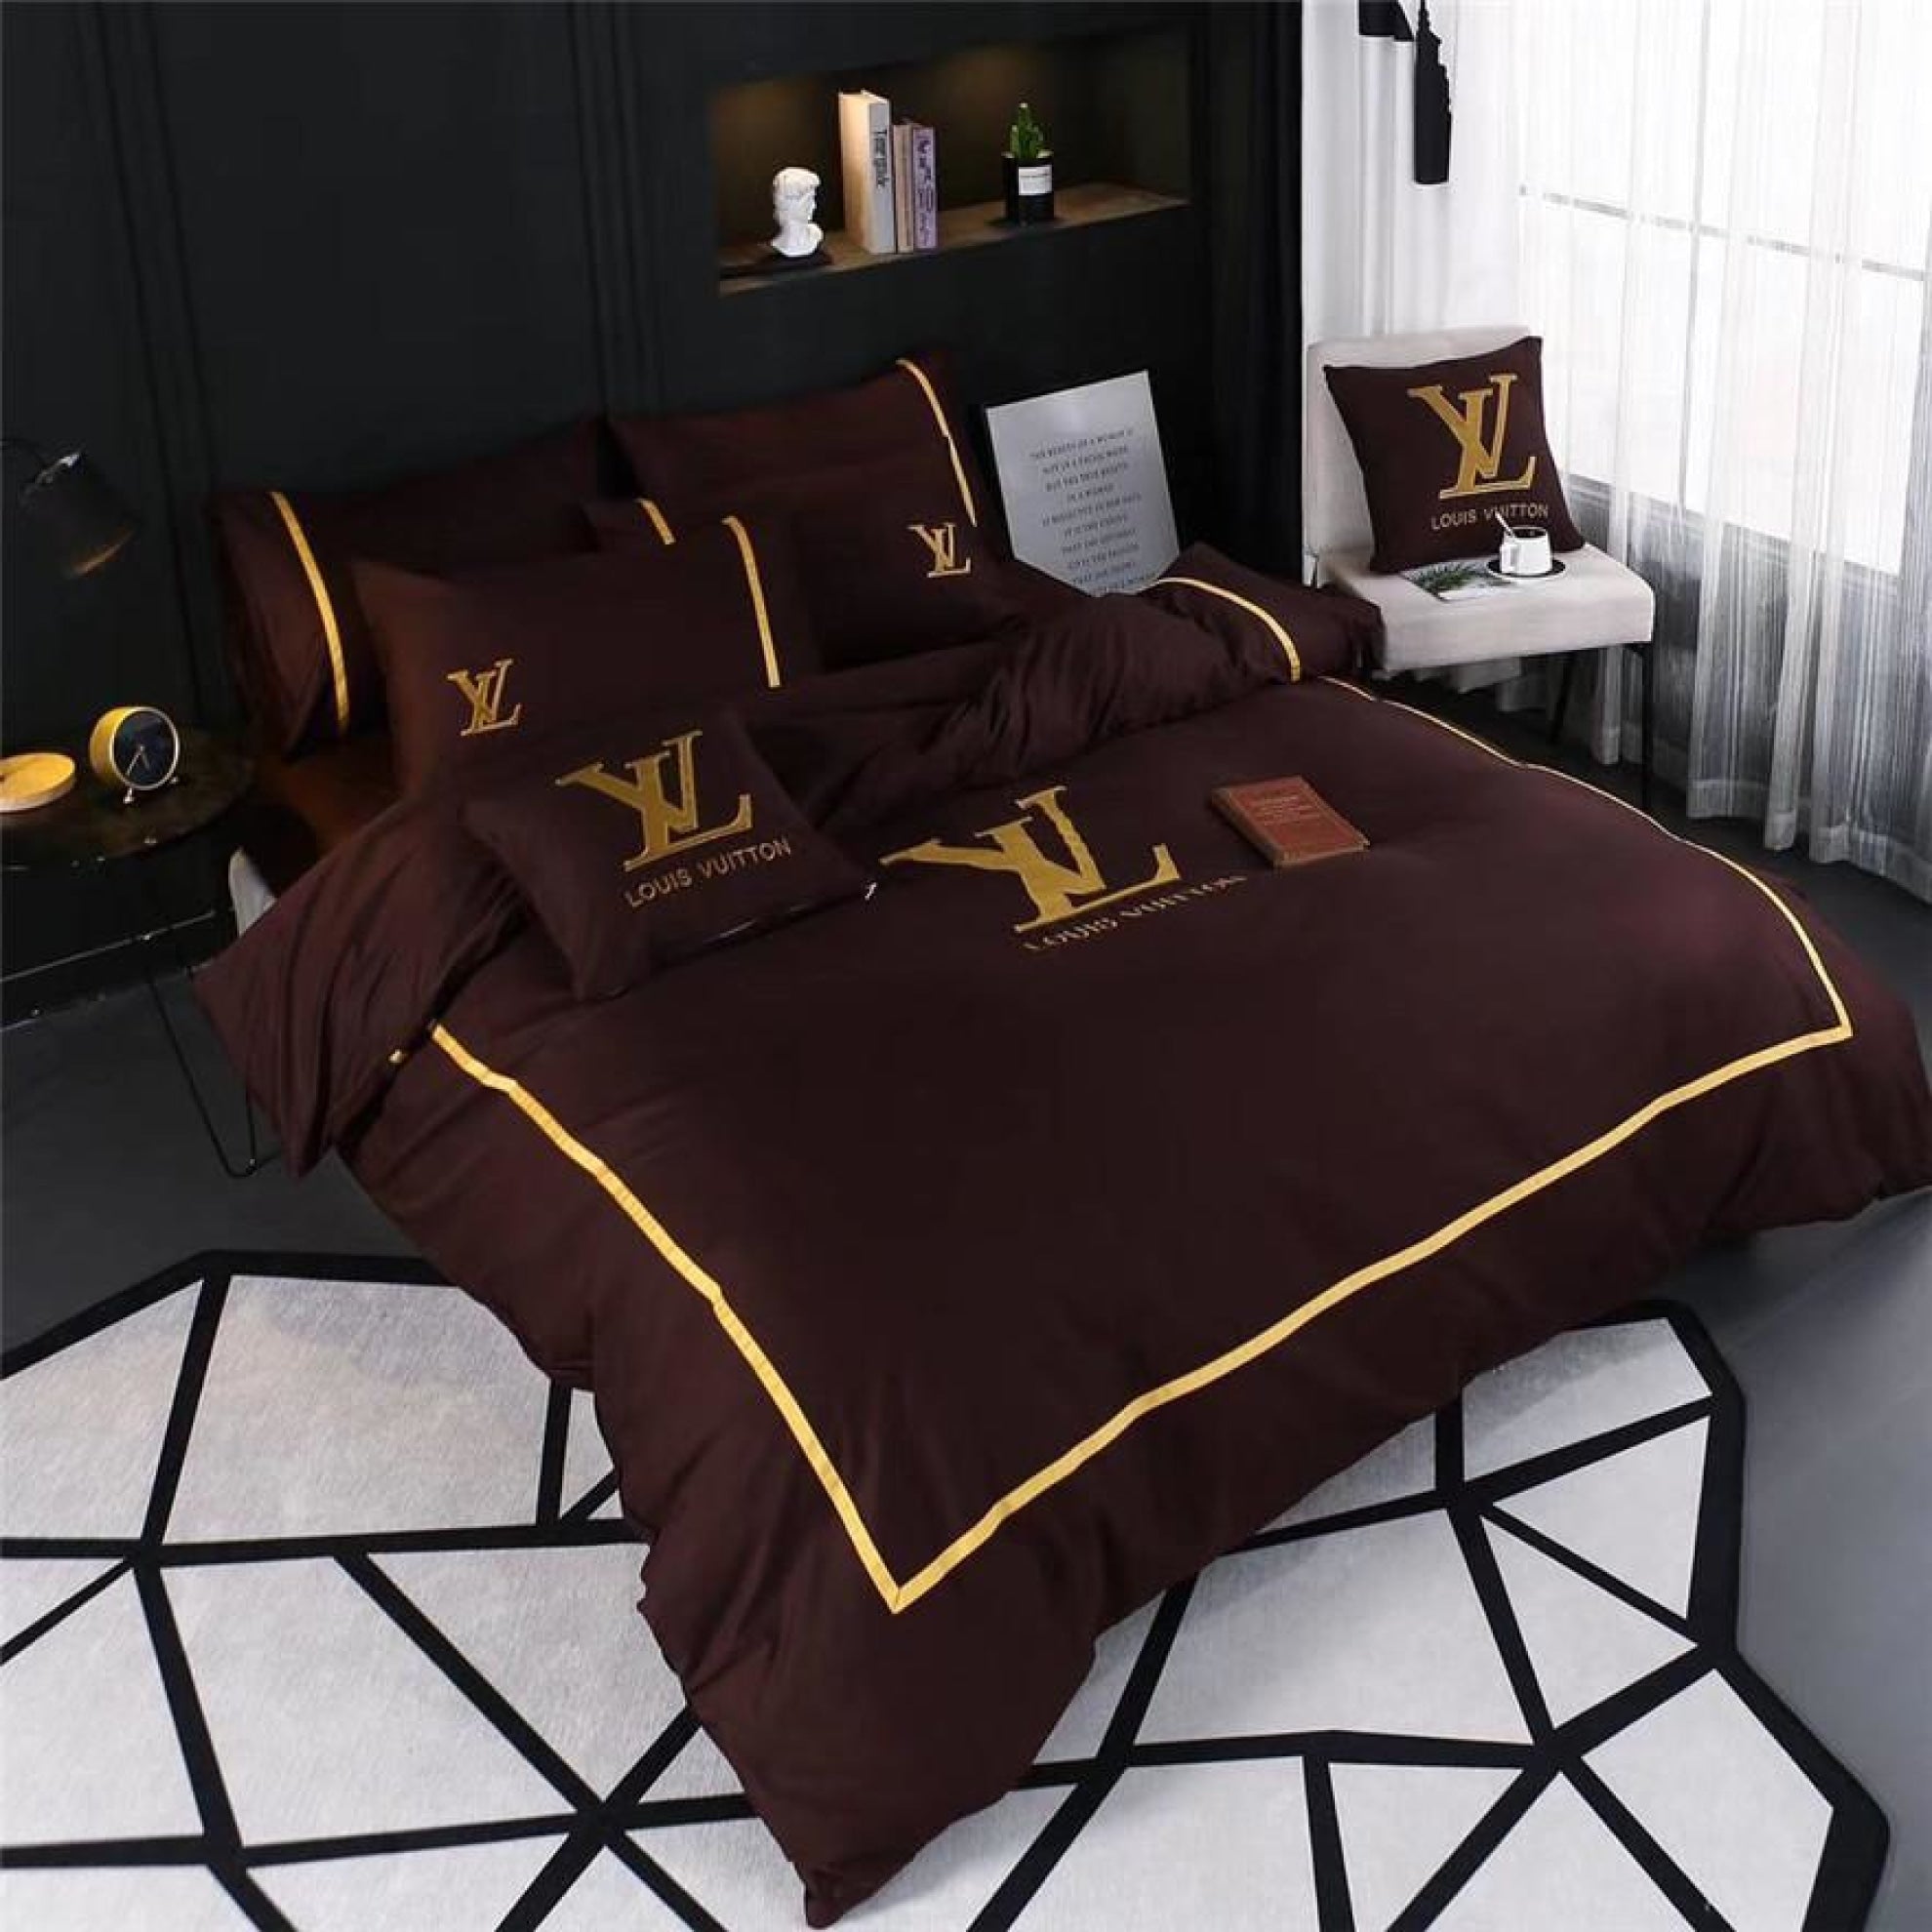 1 2 Colour Embroidery 4pcs Duvet Cover Bedding Sets My Aashis